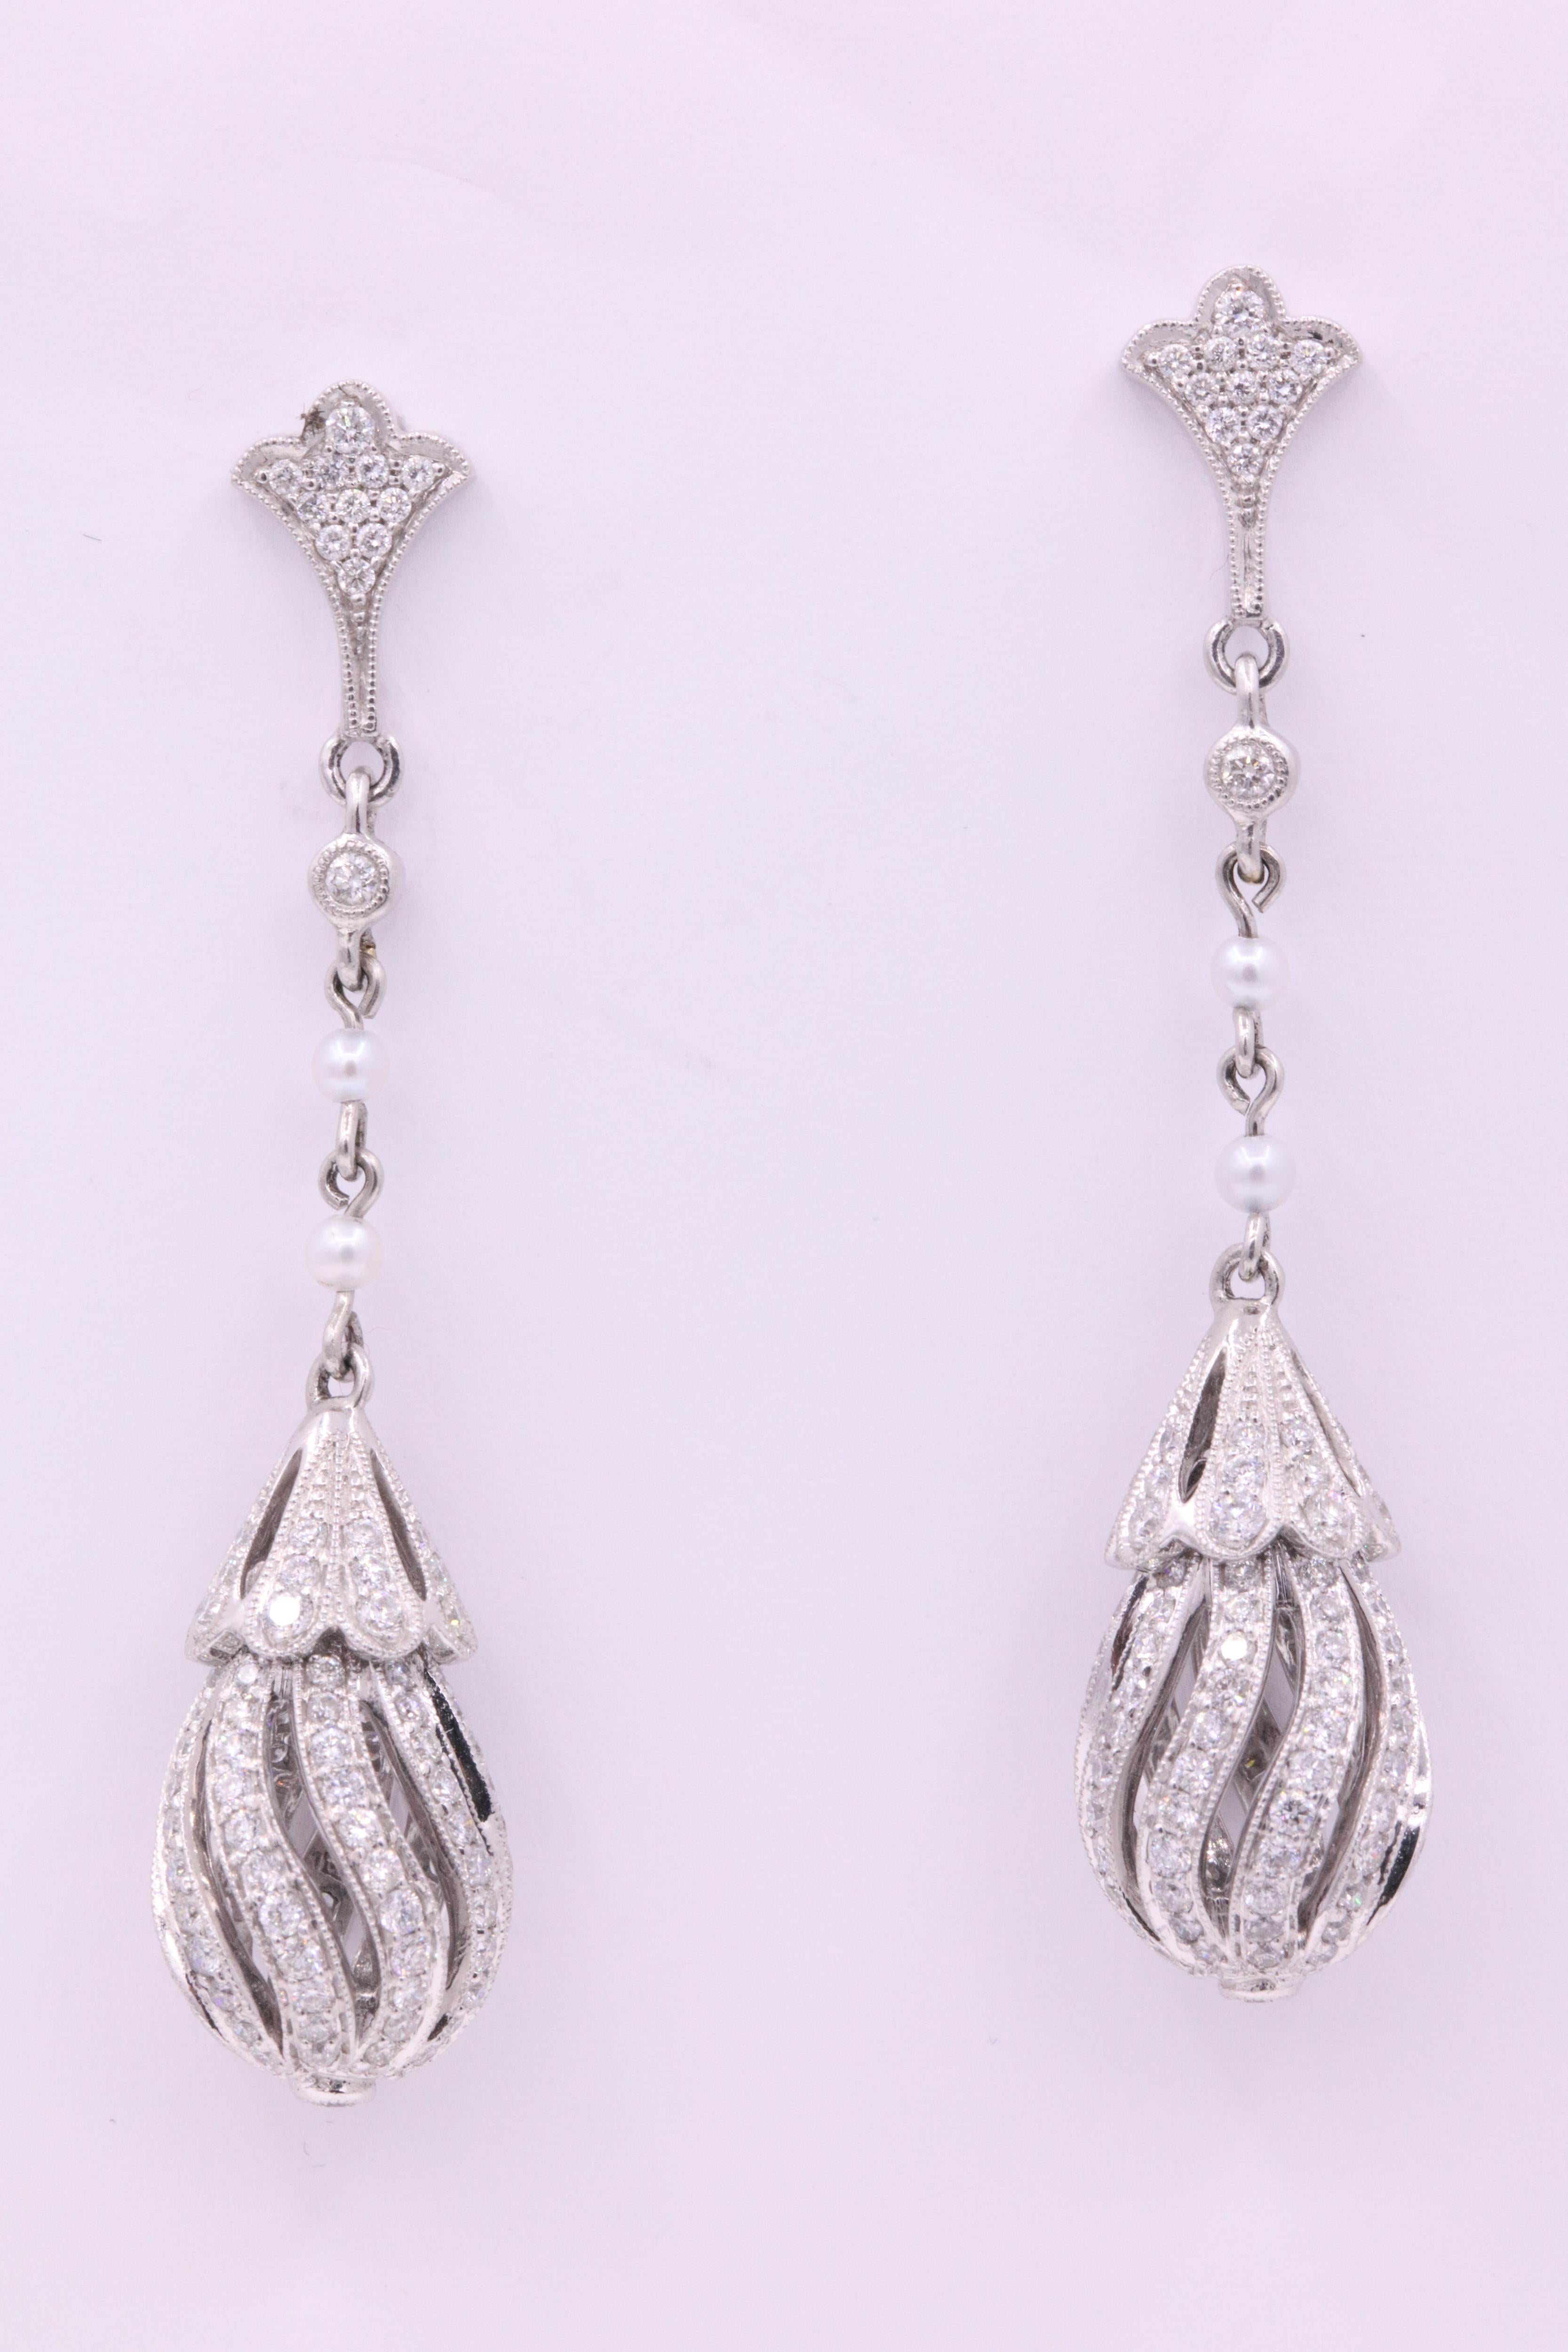 Art Deco style earrings featuring round brilliants weighing 2.71 carats with touches of white pearls, crafted in platinum. 
Color G
Clarity SI